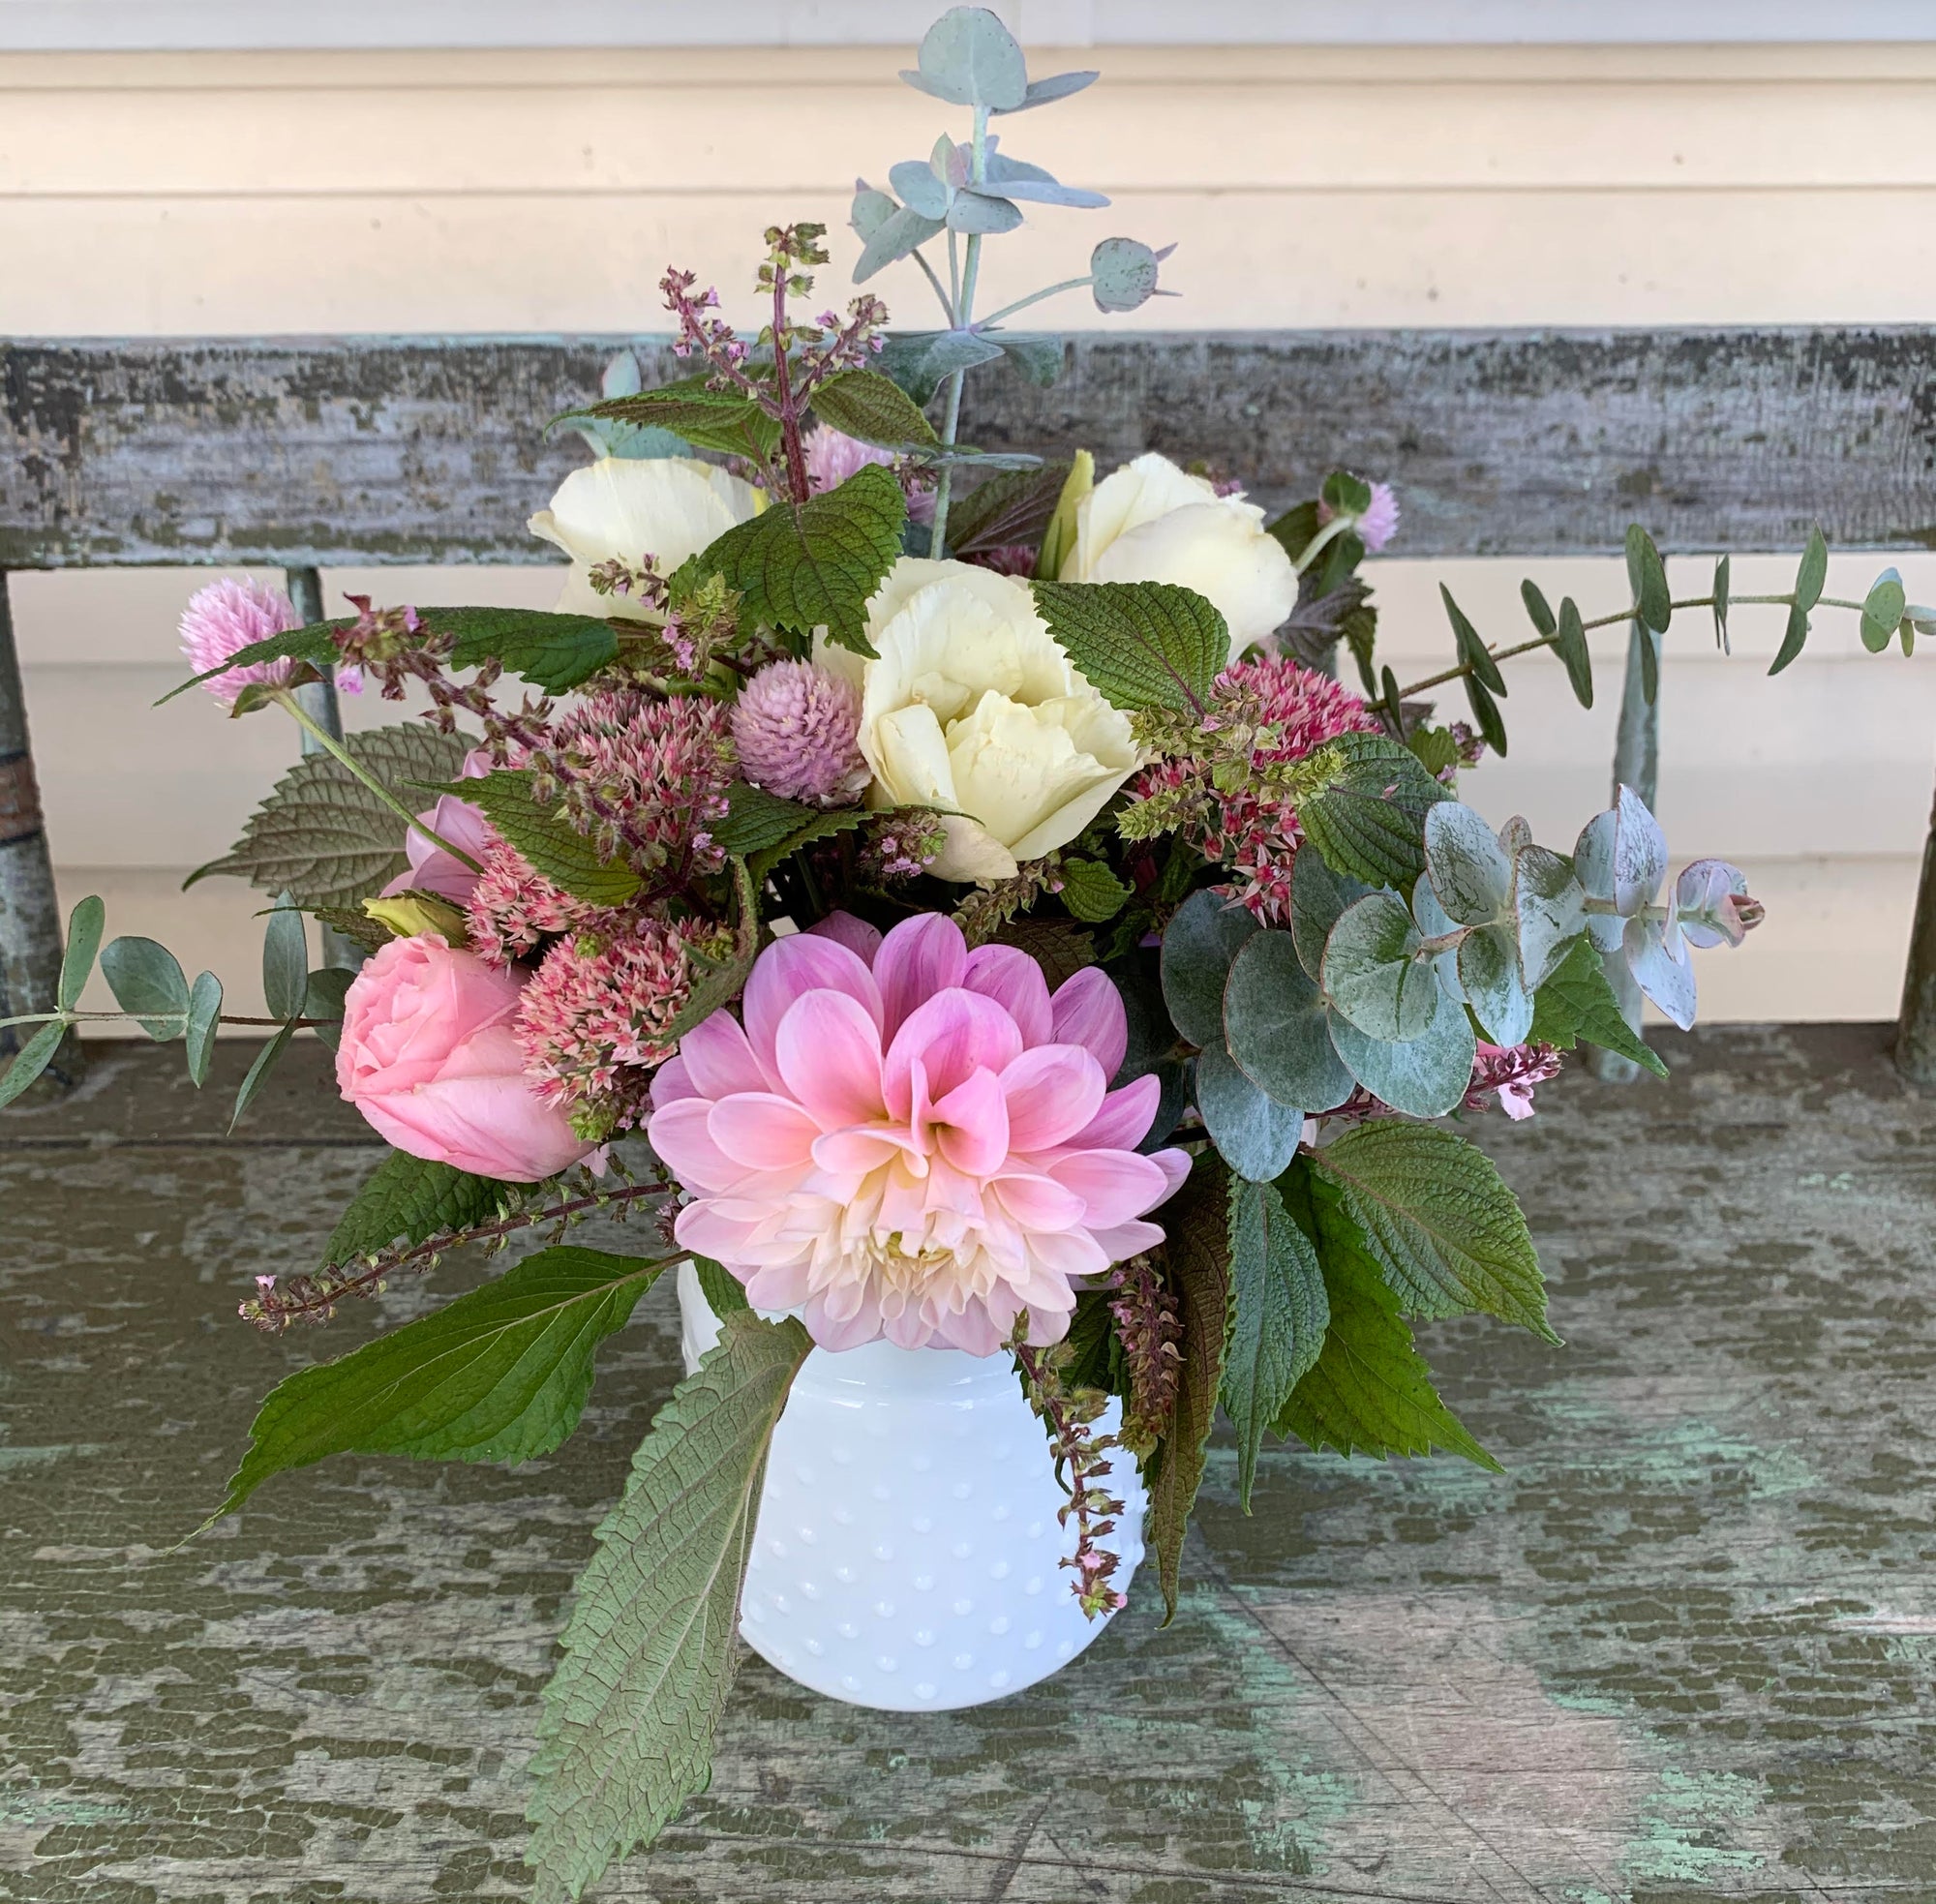 local made to order bouquets in Southern Maryland